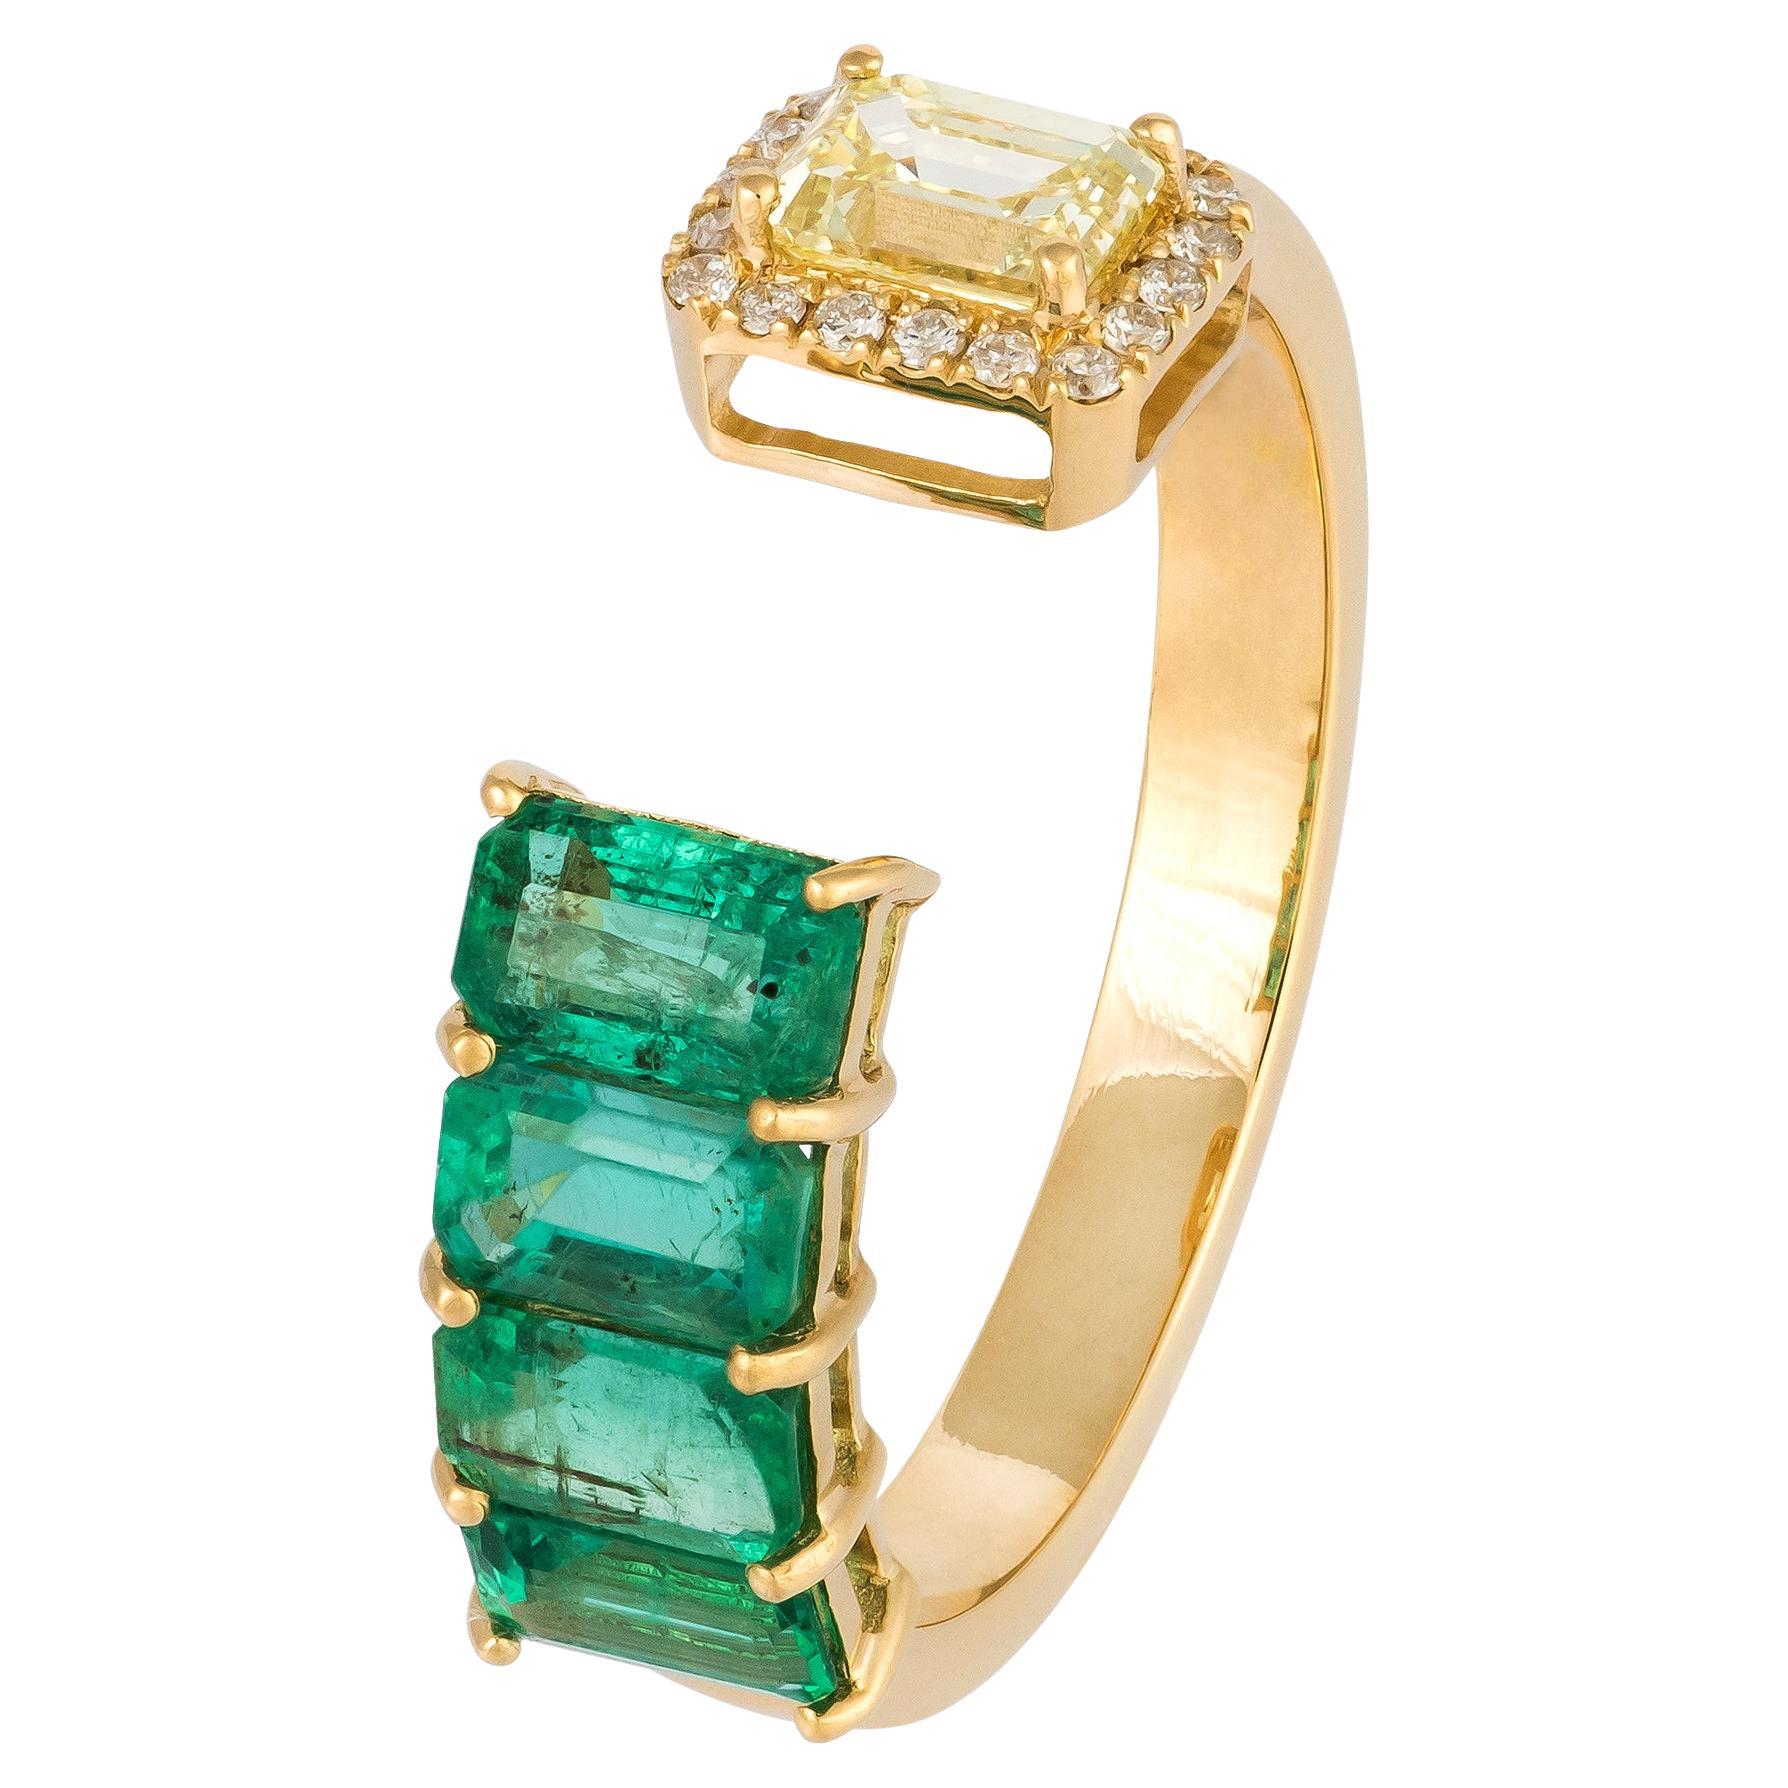 For Sale:  Impressive Emerald Yellow 18K Gold White Diamond Ring for Her